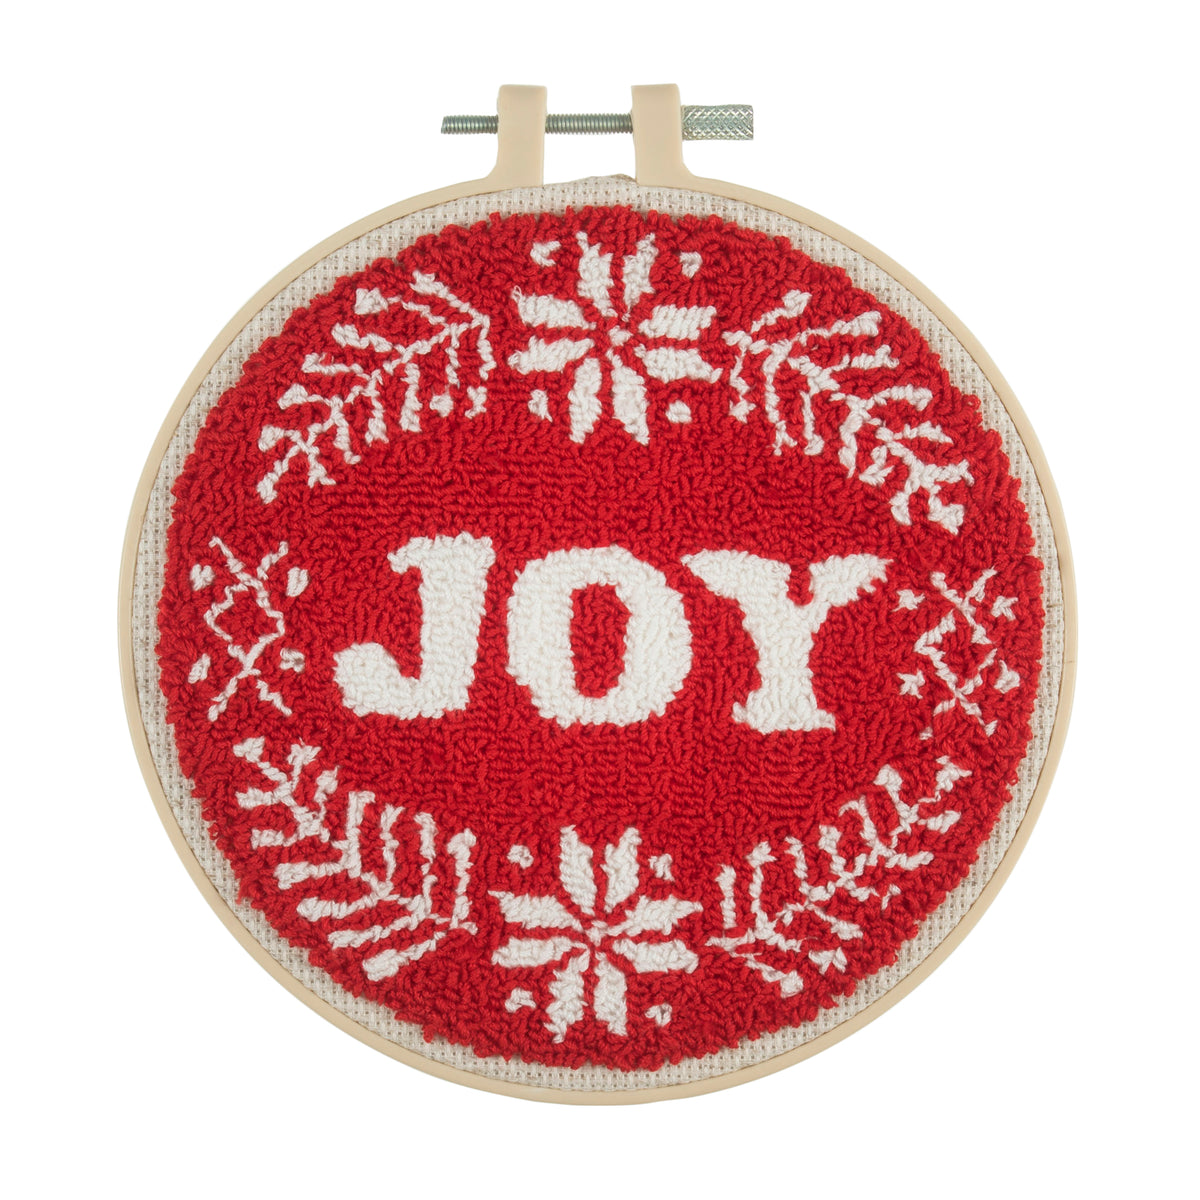 Embroidered Punch Needle Kit: Floss and Hoop - CHRISTMAS JOY